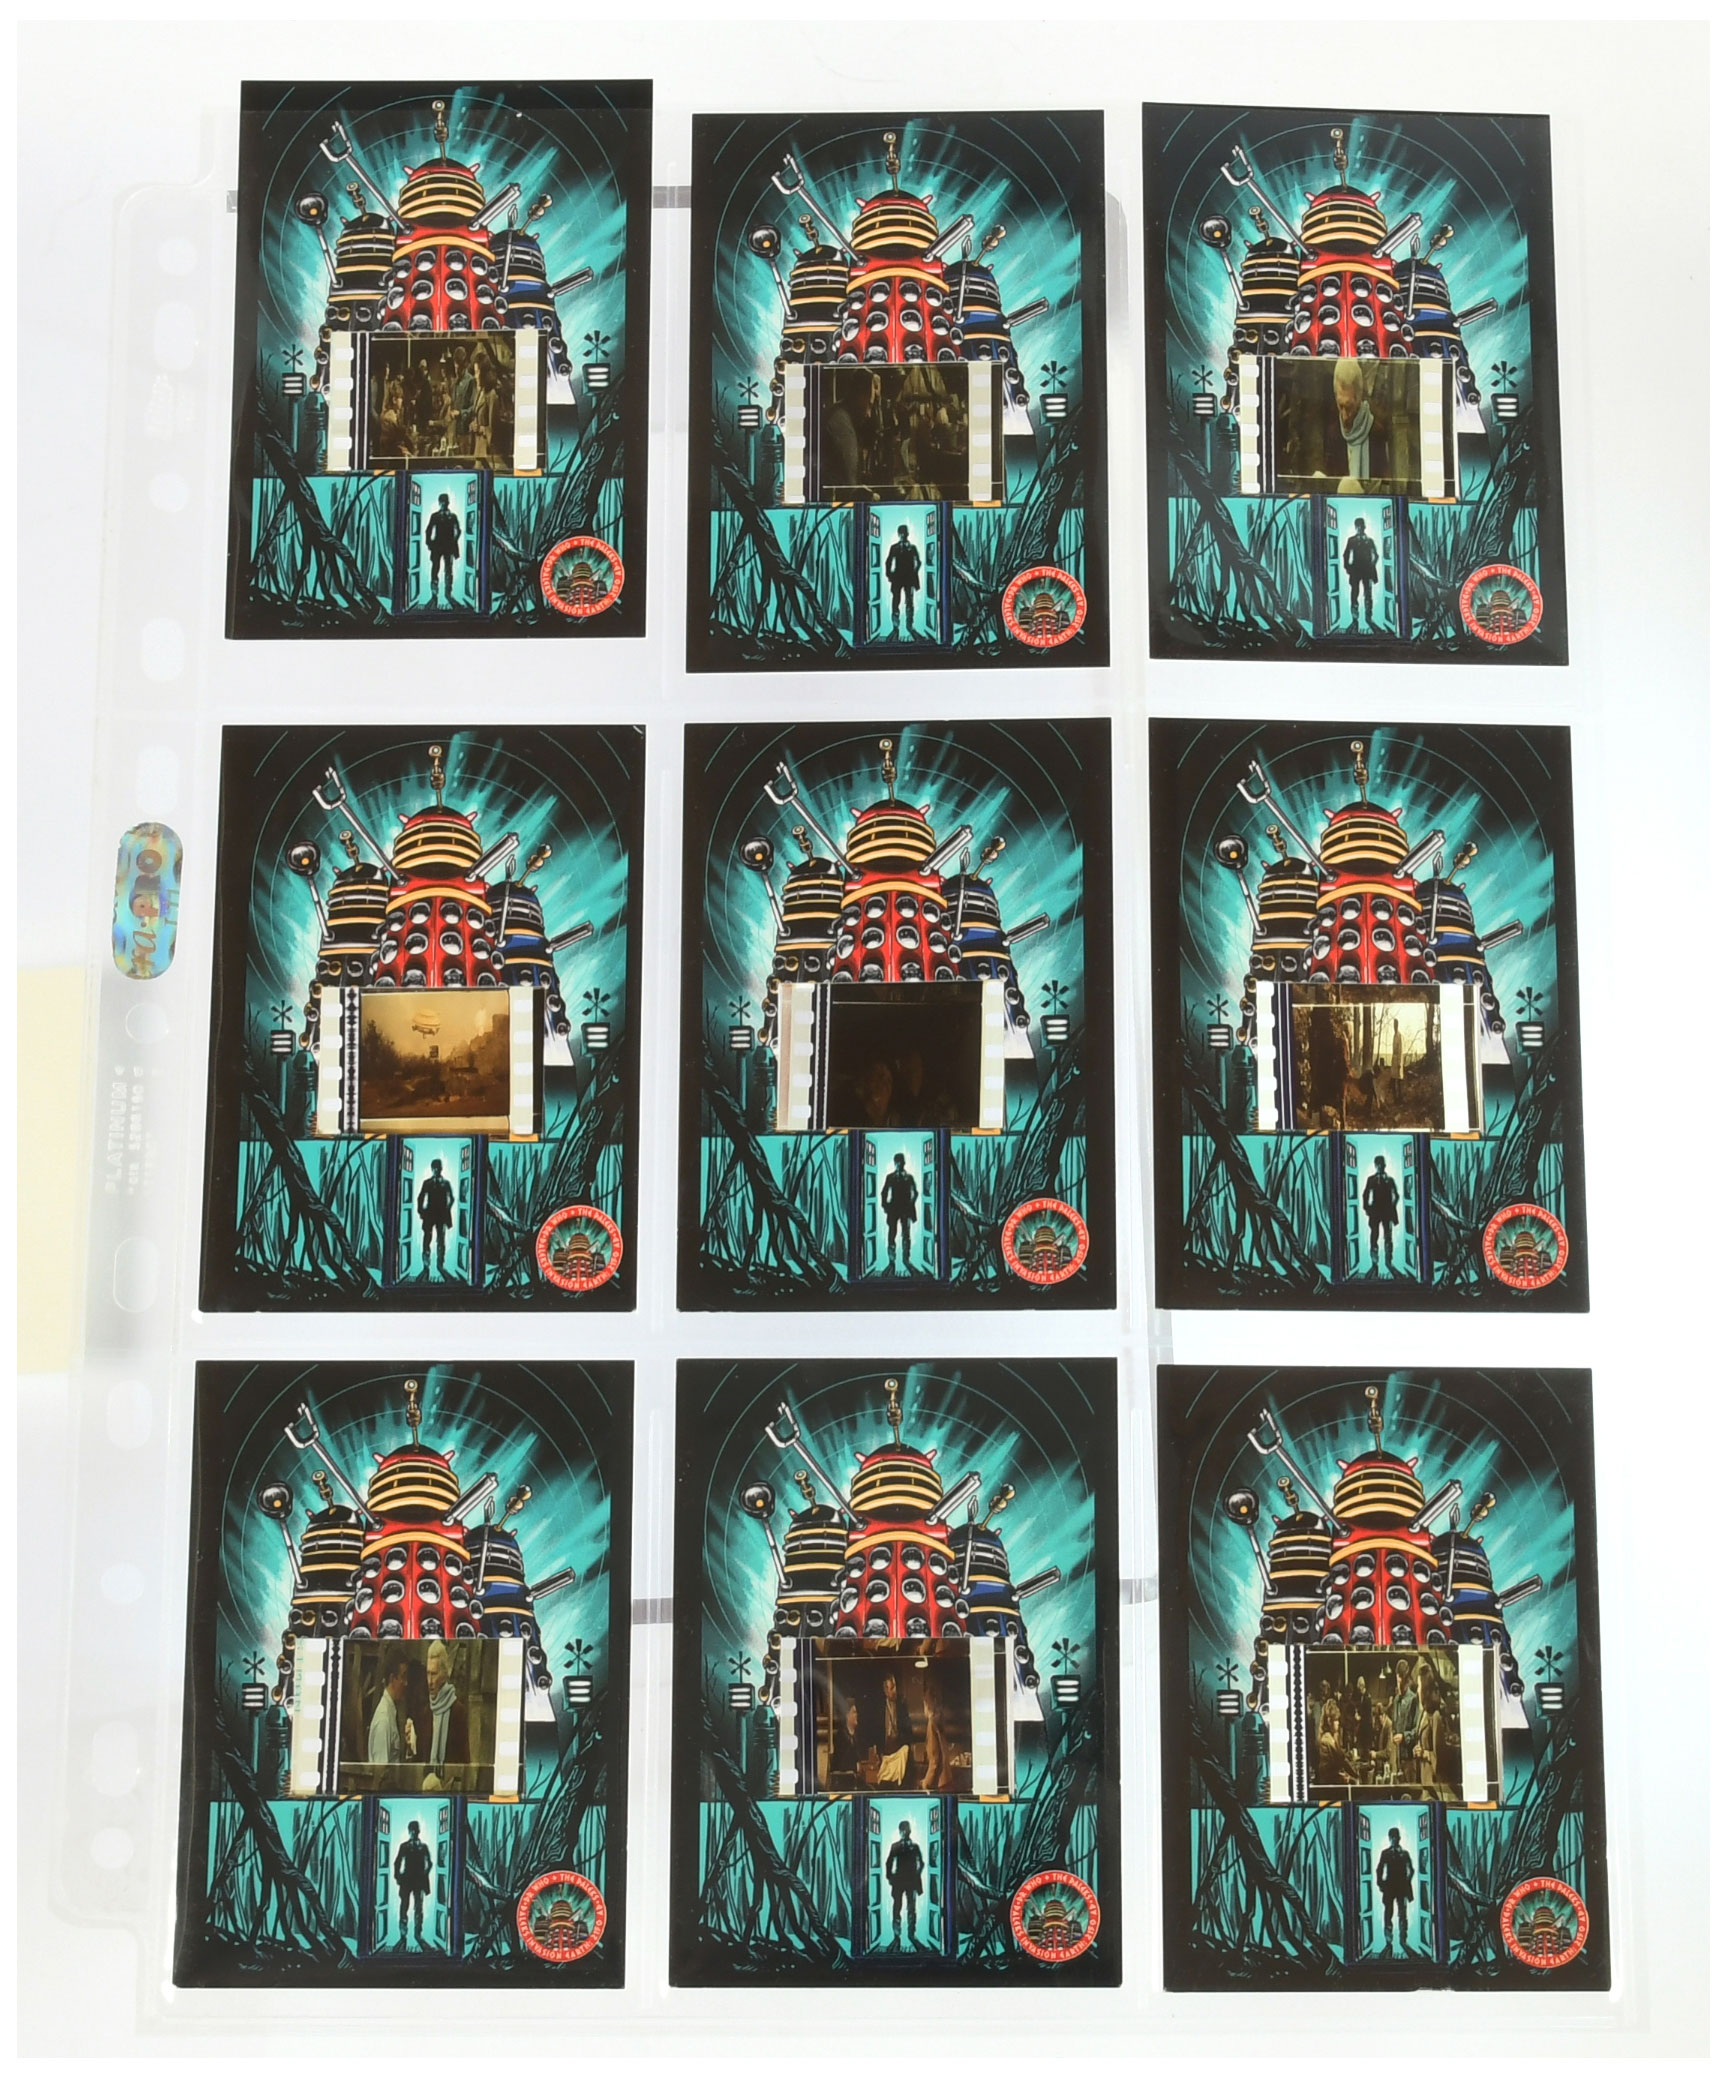 Collection of 5x Doctor Who trading card binders - Image 12 of 12